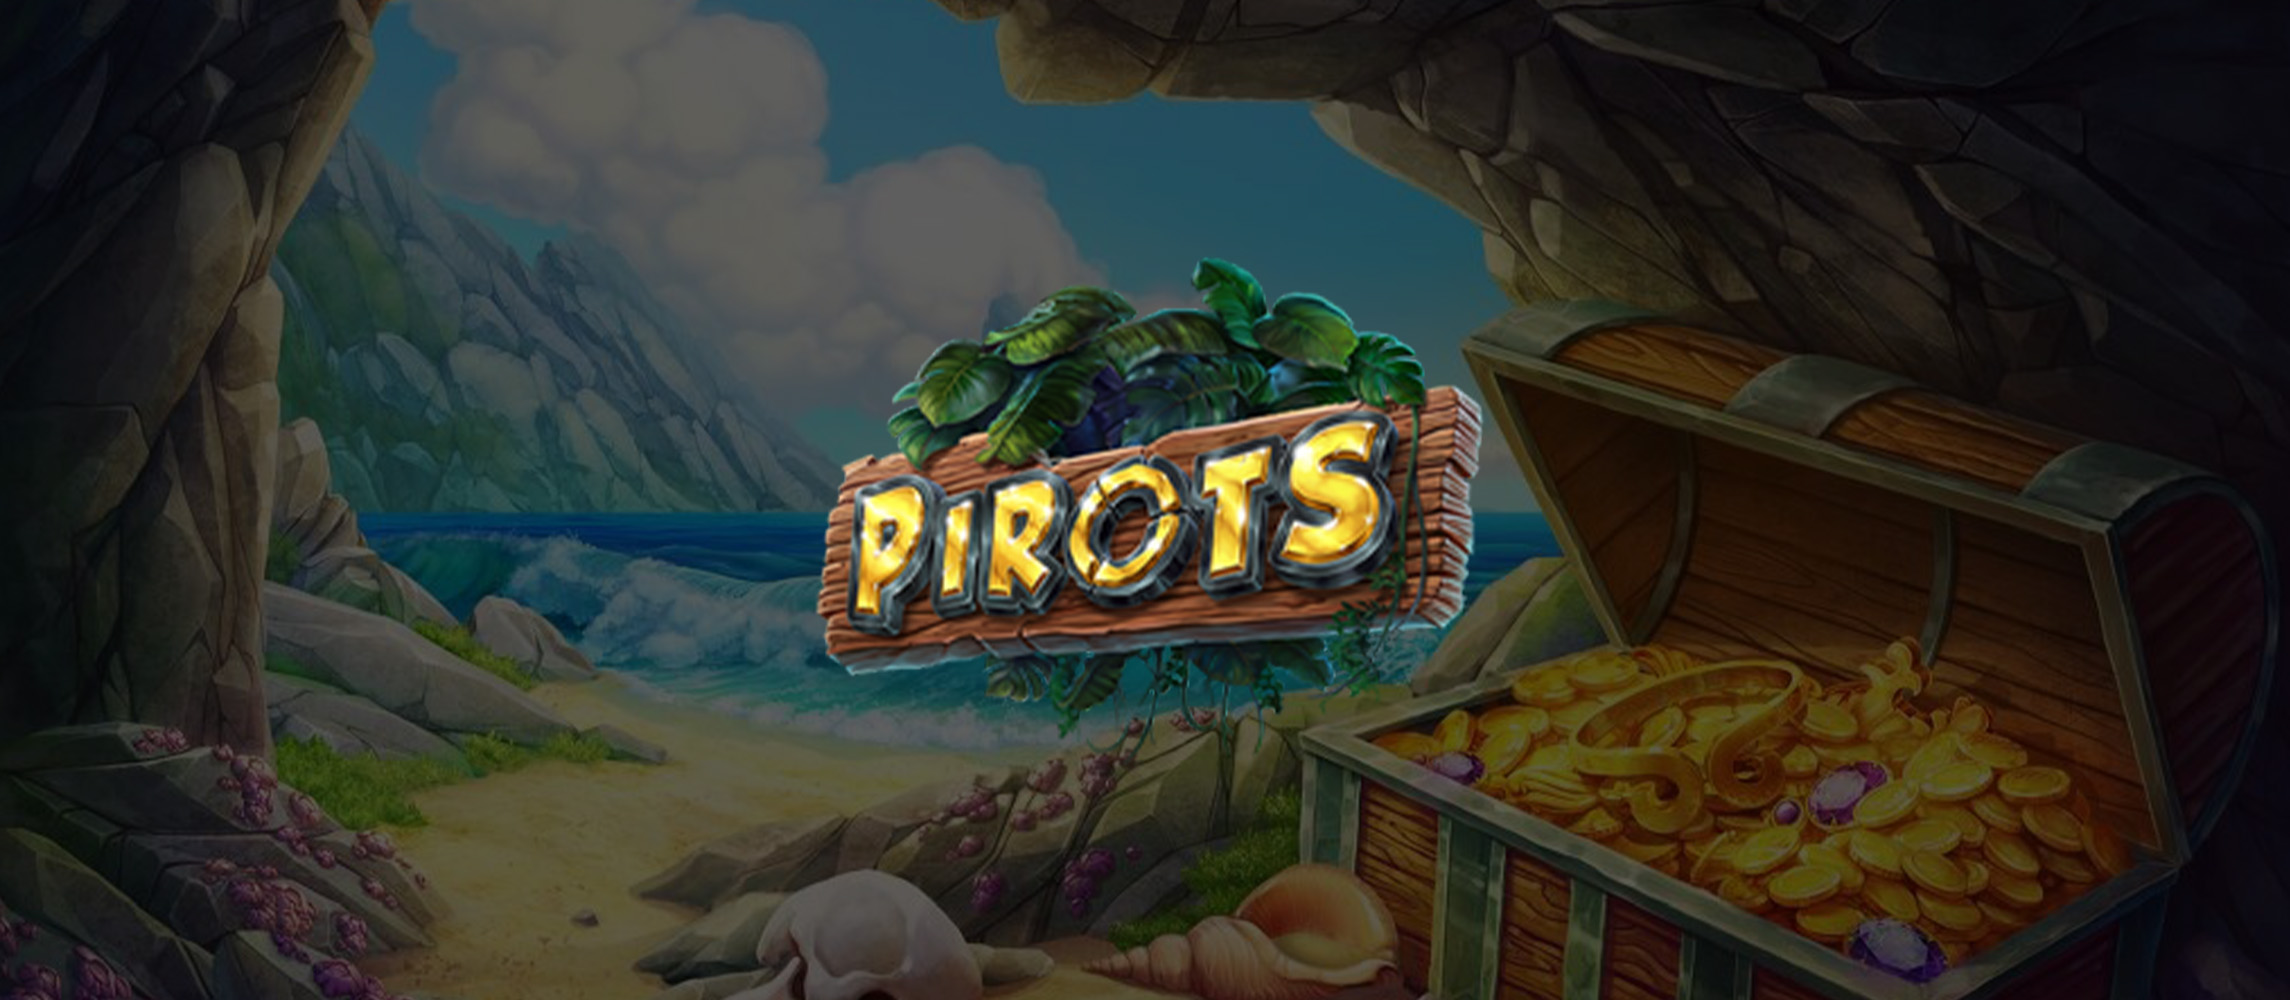 Pirots surprises with many special features in one game.